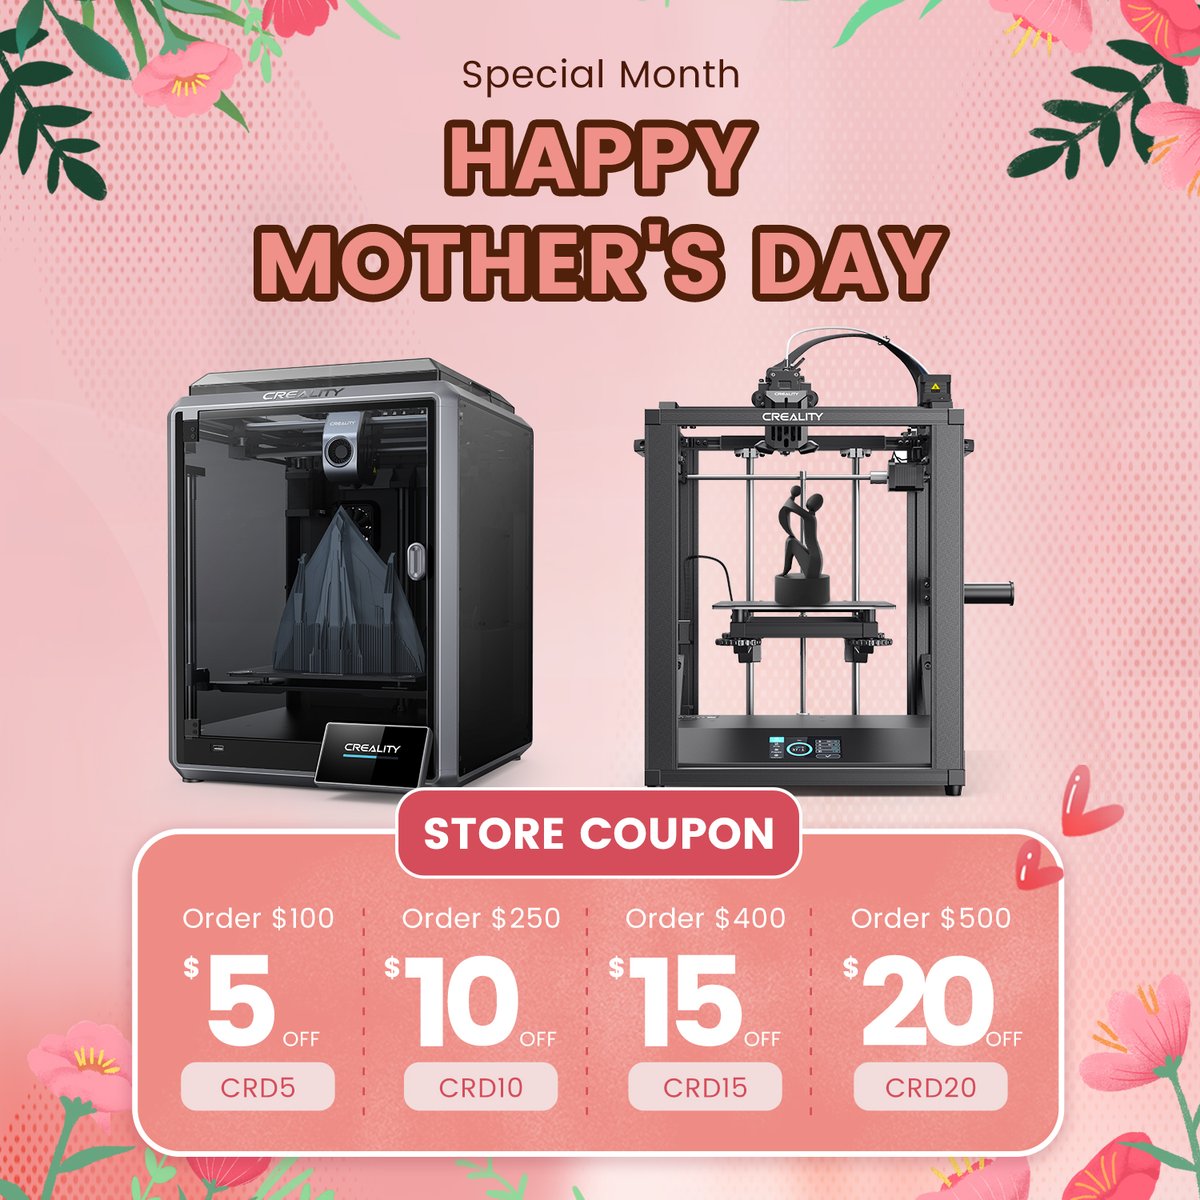 Mother's Day Sale🌷🌹10-30% OFF Use COUPONS to save more for your mum🌹👩‍👦 Global Store: bit.ly/44Kjezf EU Direct: bit.ly/eumdsale UK Direct: bit.ly/ukmdsale #3dprinting #3dprinter #fdm #resin #filament #mothersday #MothersDaySale #creality #ender3